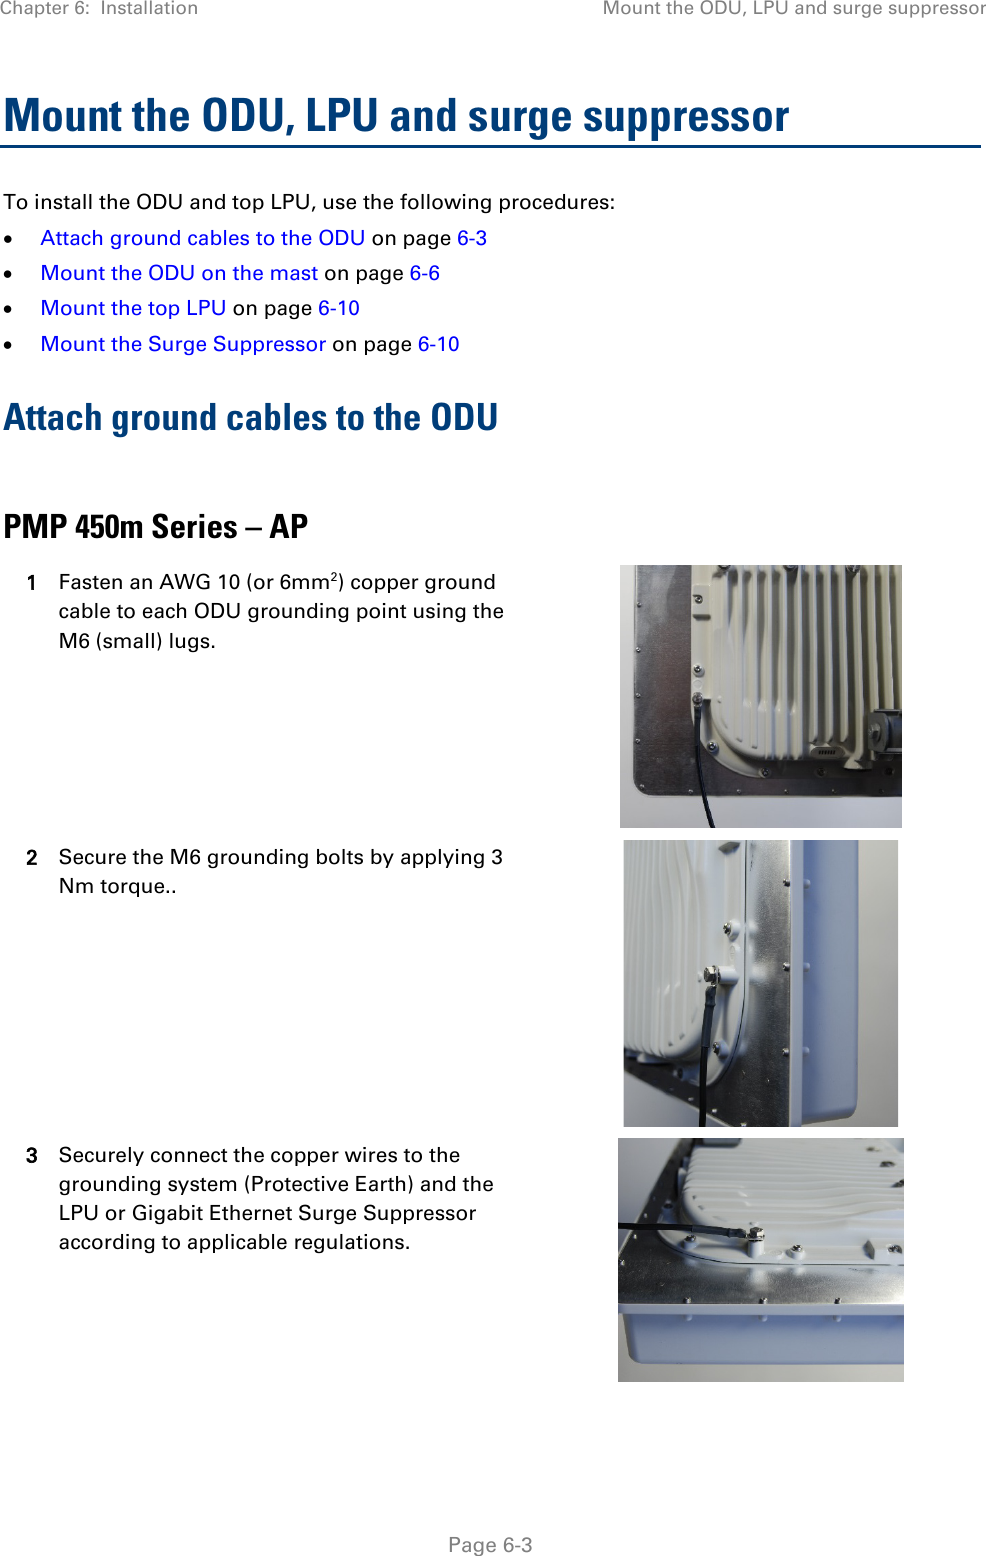 Chapter 6:  Installation Mount the ODU, LPU and surge suppressor   Page 6-3 Mount the ODU, LPU and surge suppressor To install the ODU and top LPU, use the following procedures: • Attach ground cables to the ODU on page 6-3 • Mount the ODU on the mast on page 6-6 • Mount the top LPU on page 6-10 • Mount the Surge Suppressor on page 6-10 Attach ground cables to the ODU  PMP 450m Series – AP 1 Fasten an AWG 10 (or 6mm2) copper ground cable to each ODU grounding point using the M6 (small) lugs.  2 Secure the M6 grounding bolts by applying 3 Nm torque..  3 Securely connect the copper wires to the grounding system (Protective Earth) and the LPU or Gigabit Ethernet Surge Suppressor according to applicable regulations.   